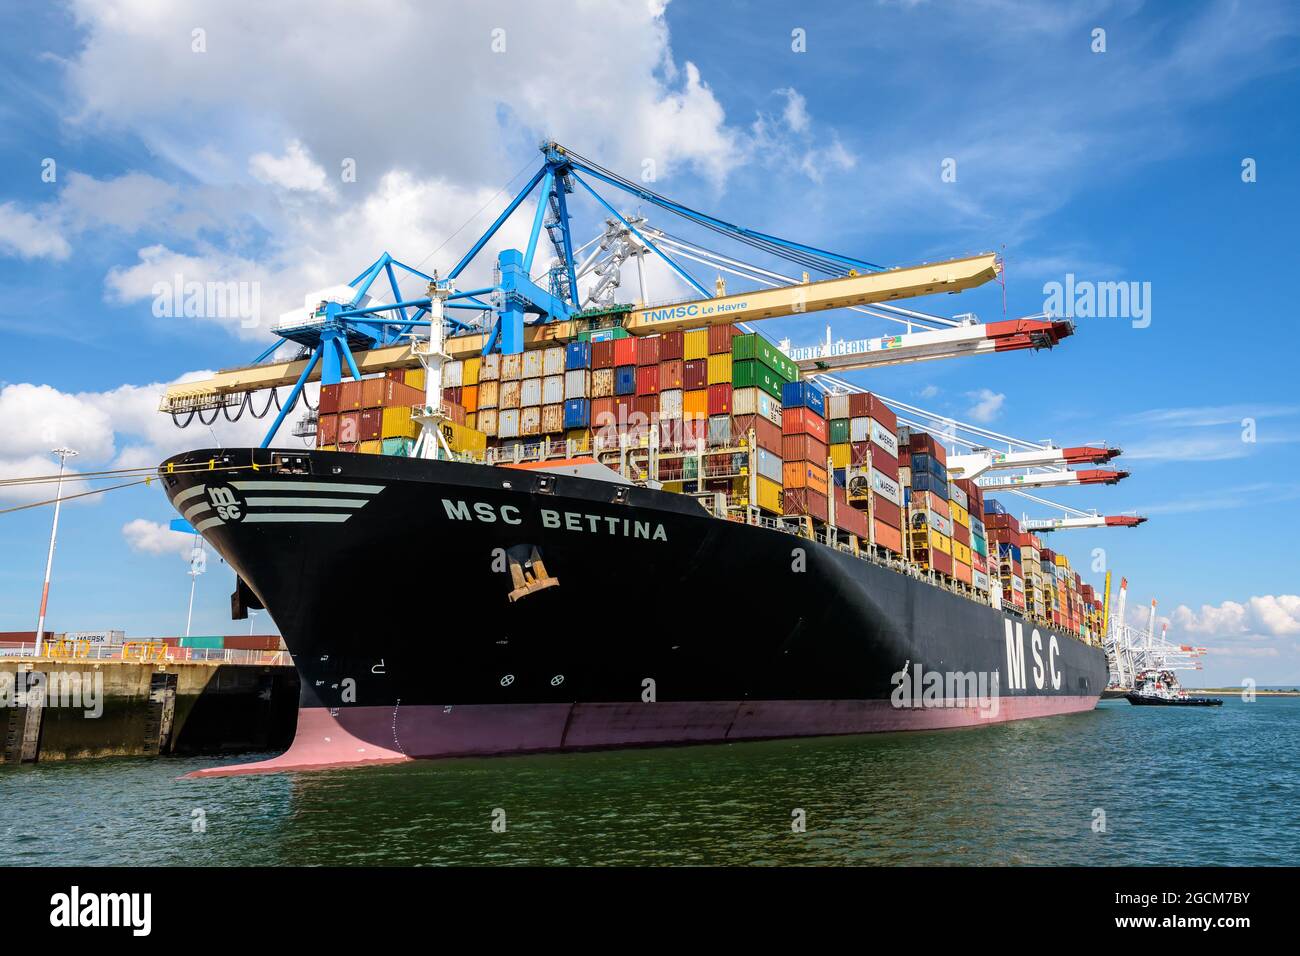 Wide angle view of MSC Bettina container ship docked in Port 2000 container terminal in Le Havre, France. Stock Photo